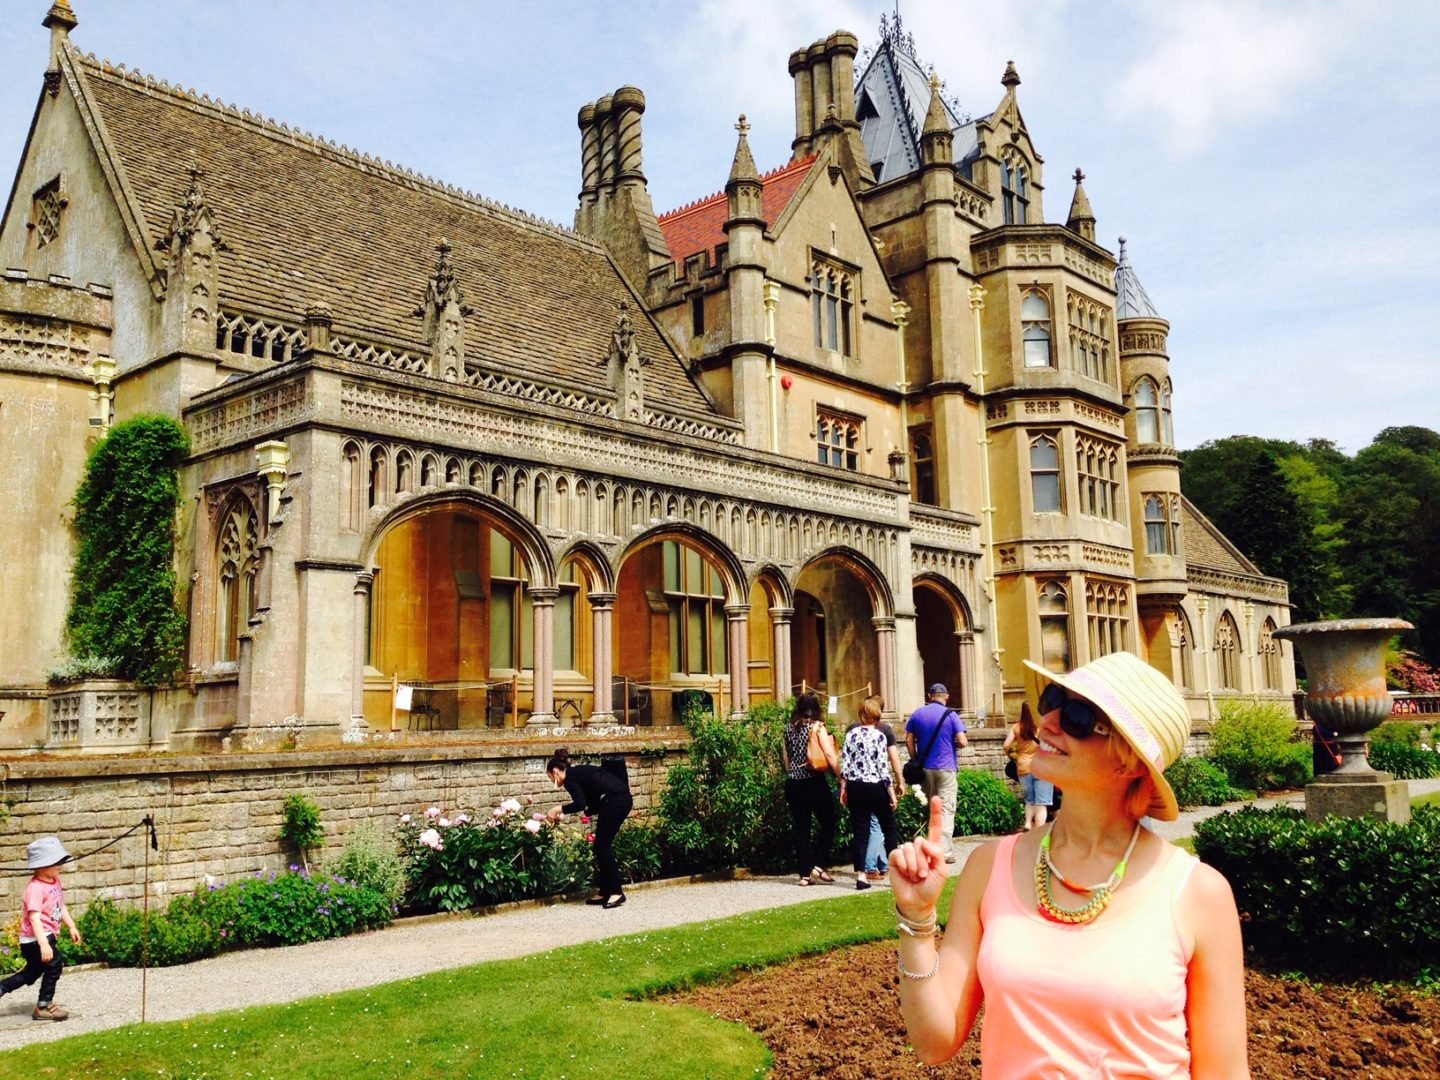 Tyntesfield house - just off the motorway